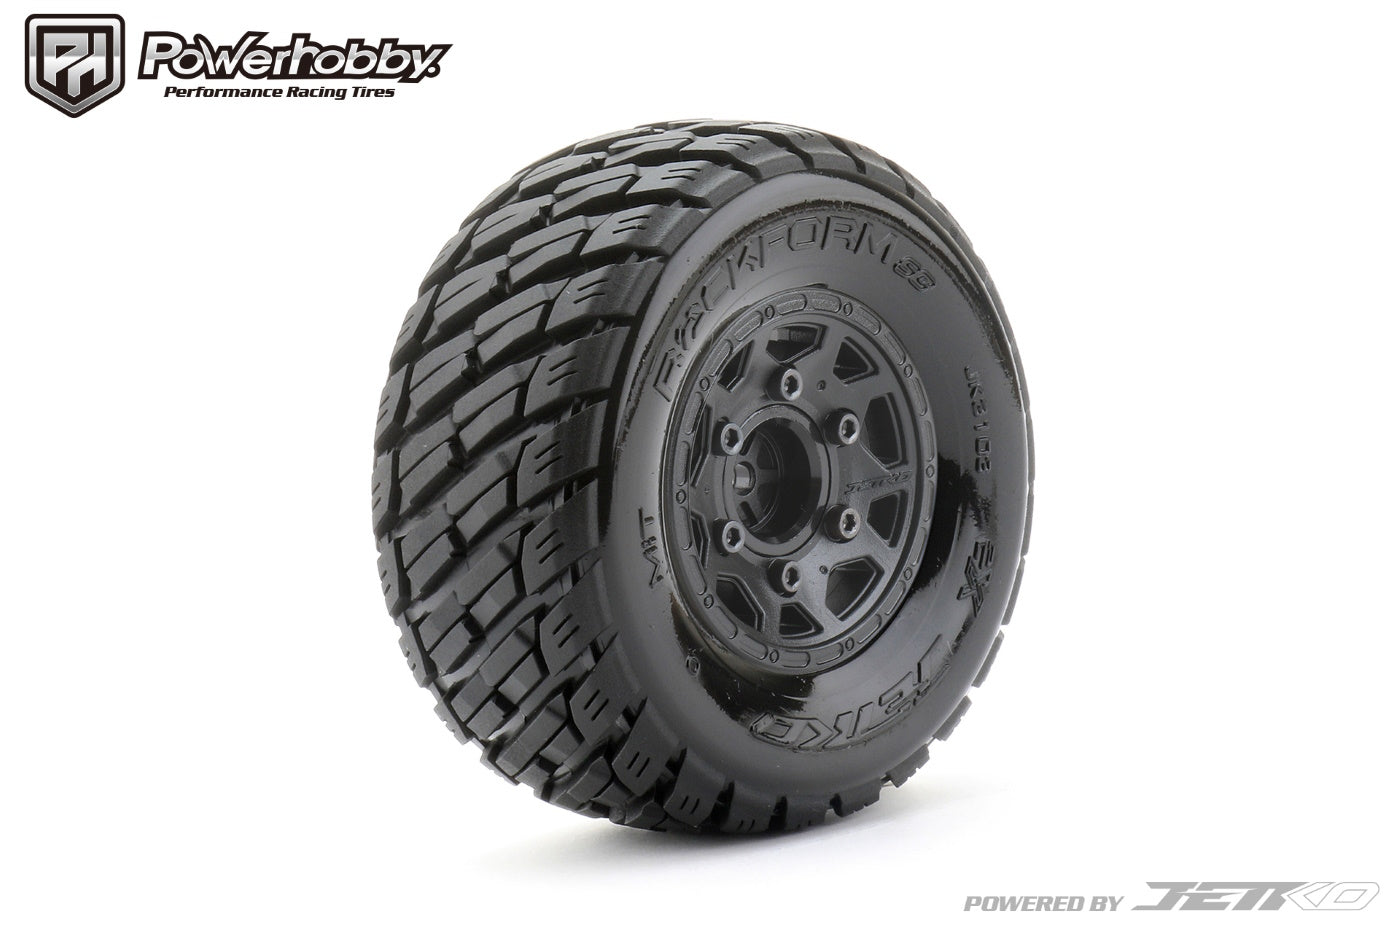 Powerhobby Rockform 1/10 SC Belted Tires (2) with Removable Hex Wheels